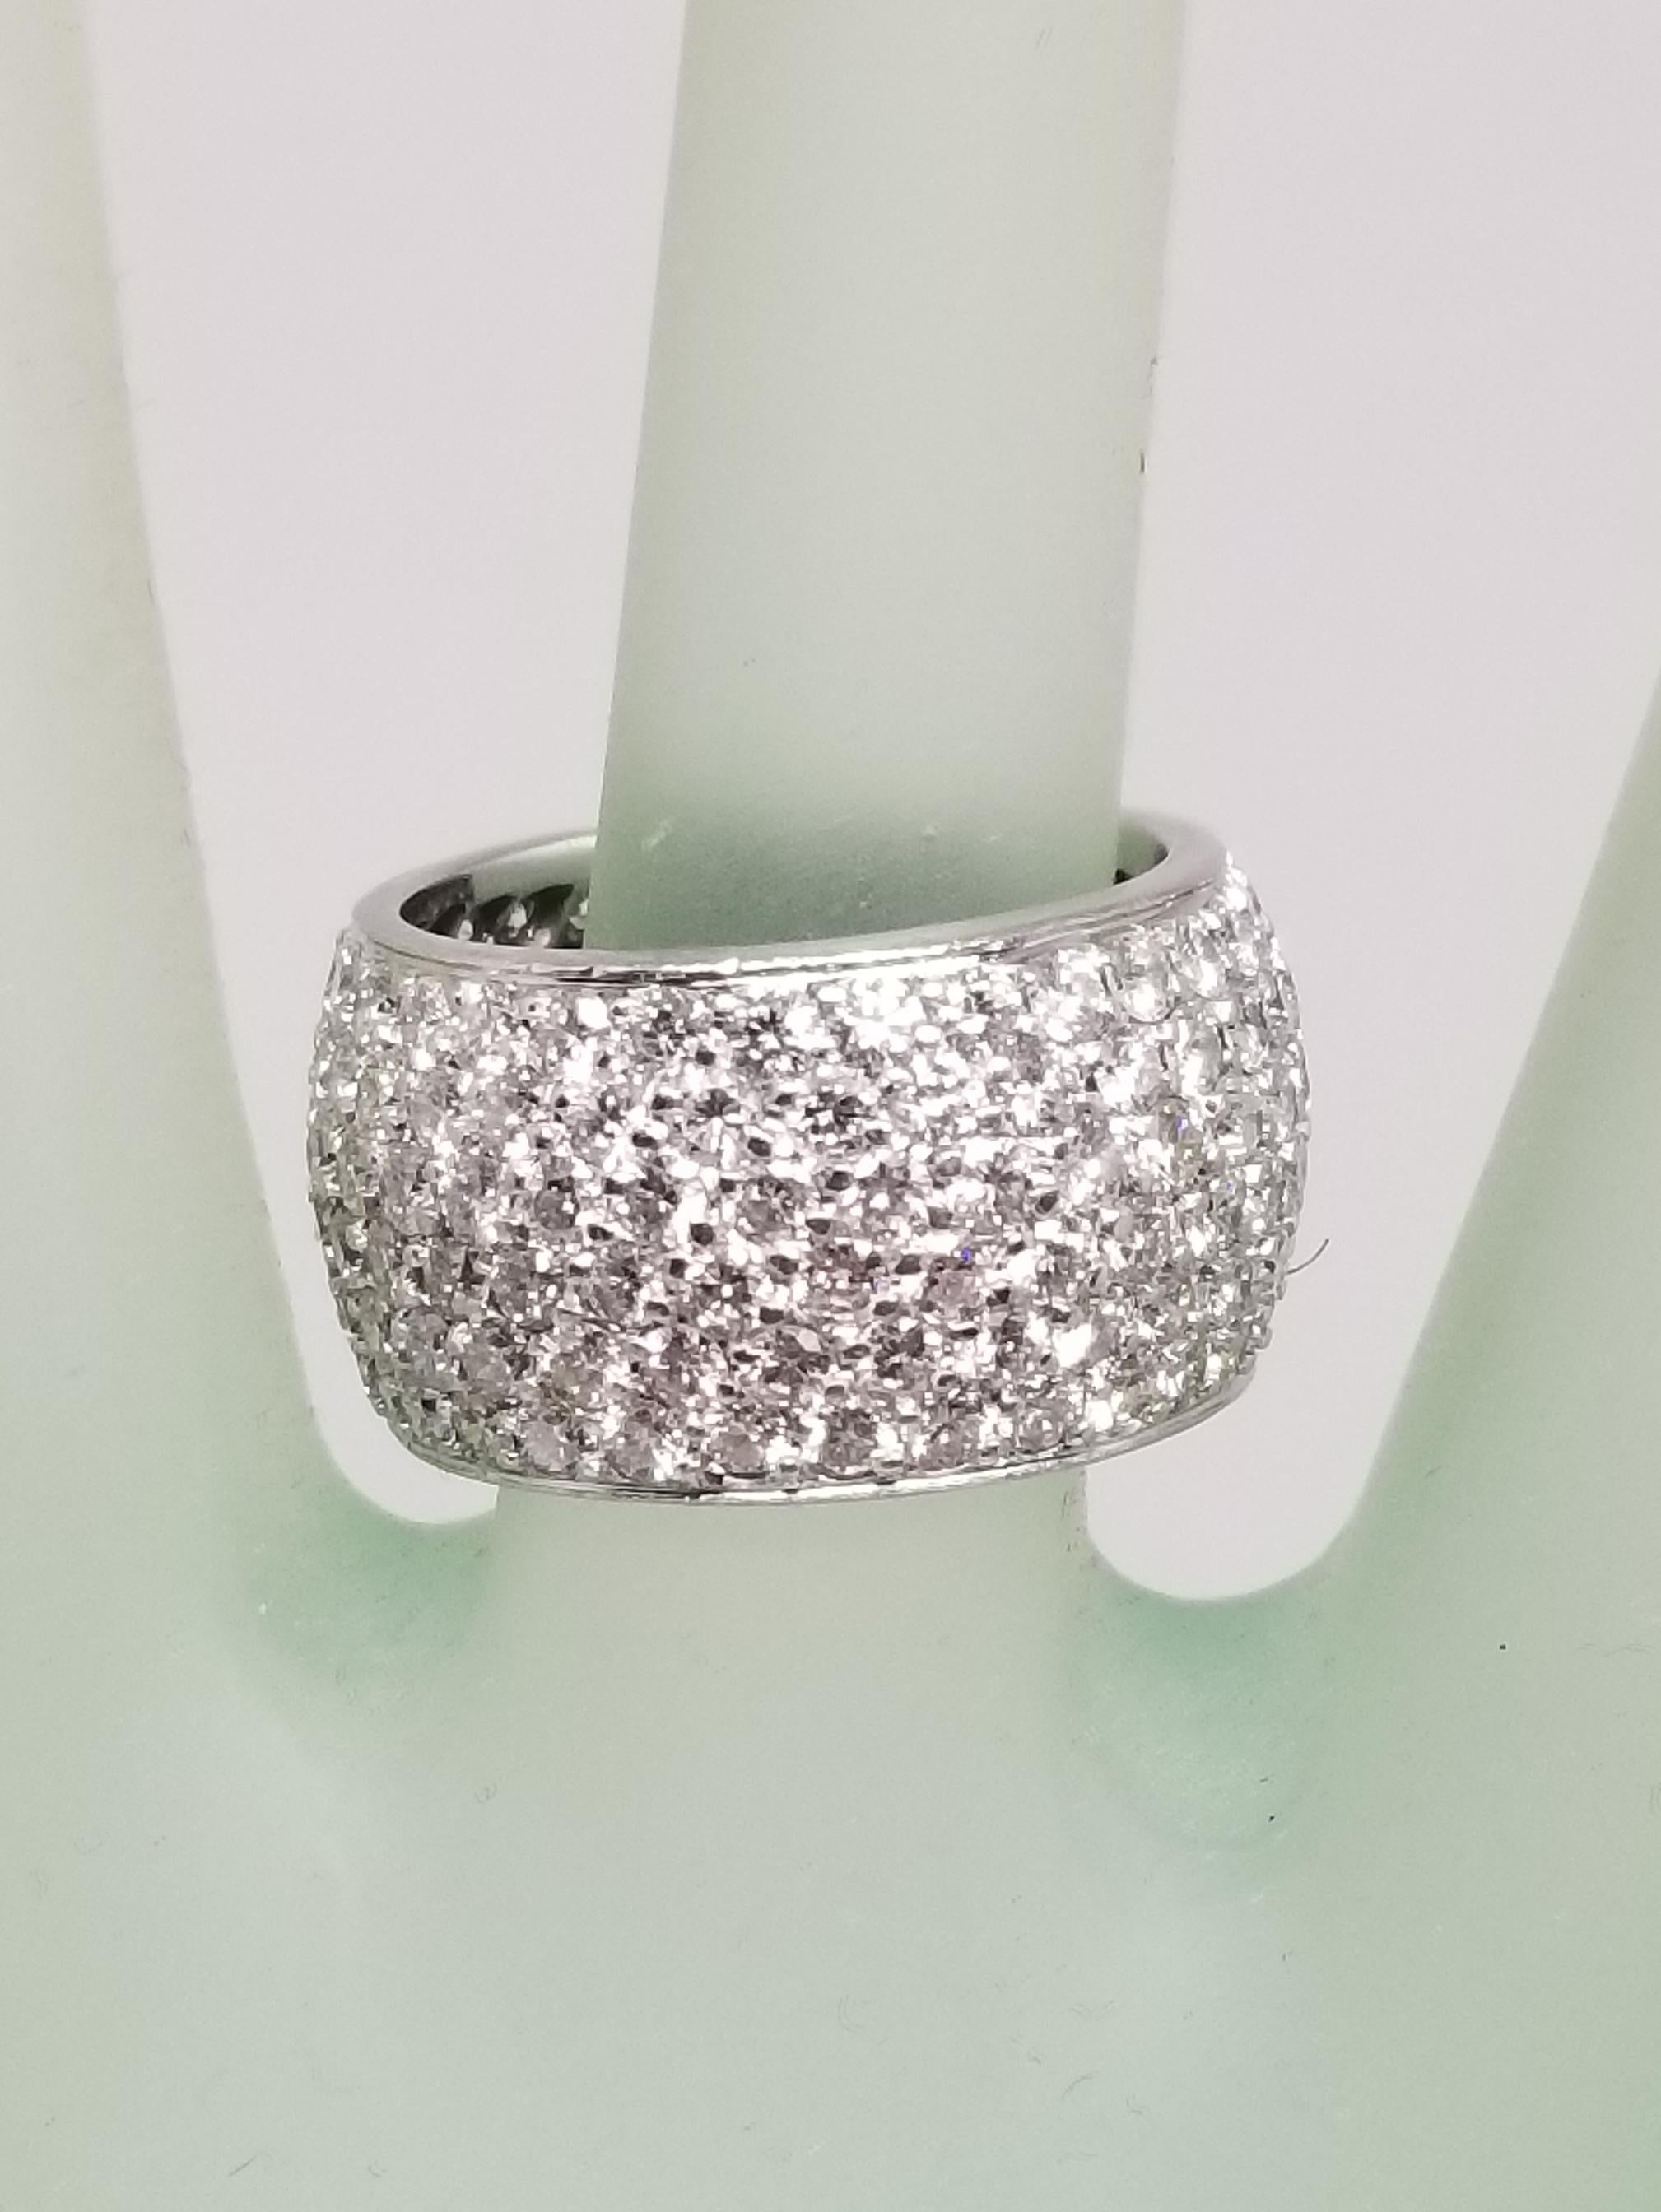 14k white gold 6 row pave' set diamond eternity ring containing 174 round full cut diamonds of very fine quality weighing 7.03cts, ring size is a 6.5 but can be made to fit.